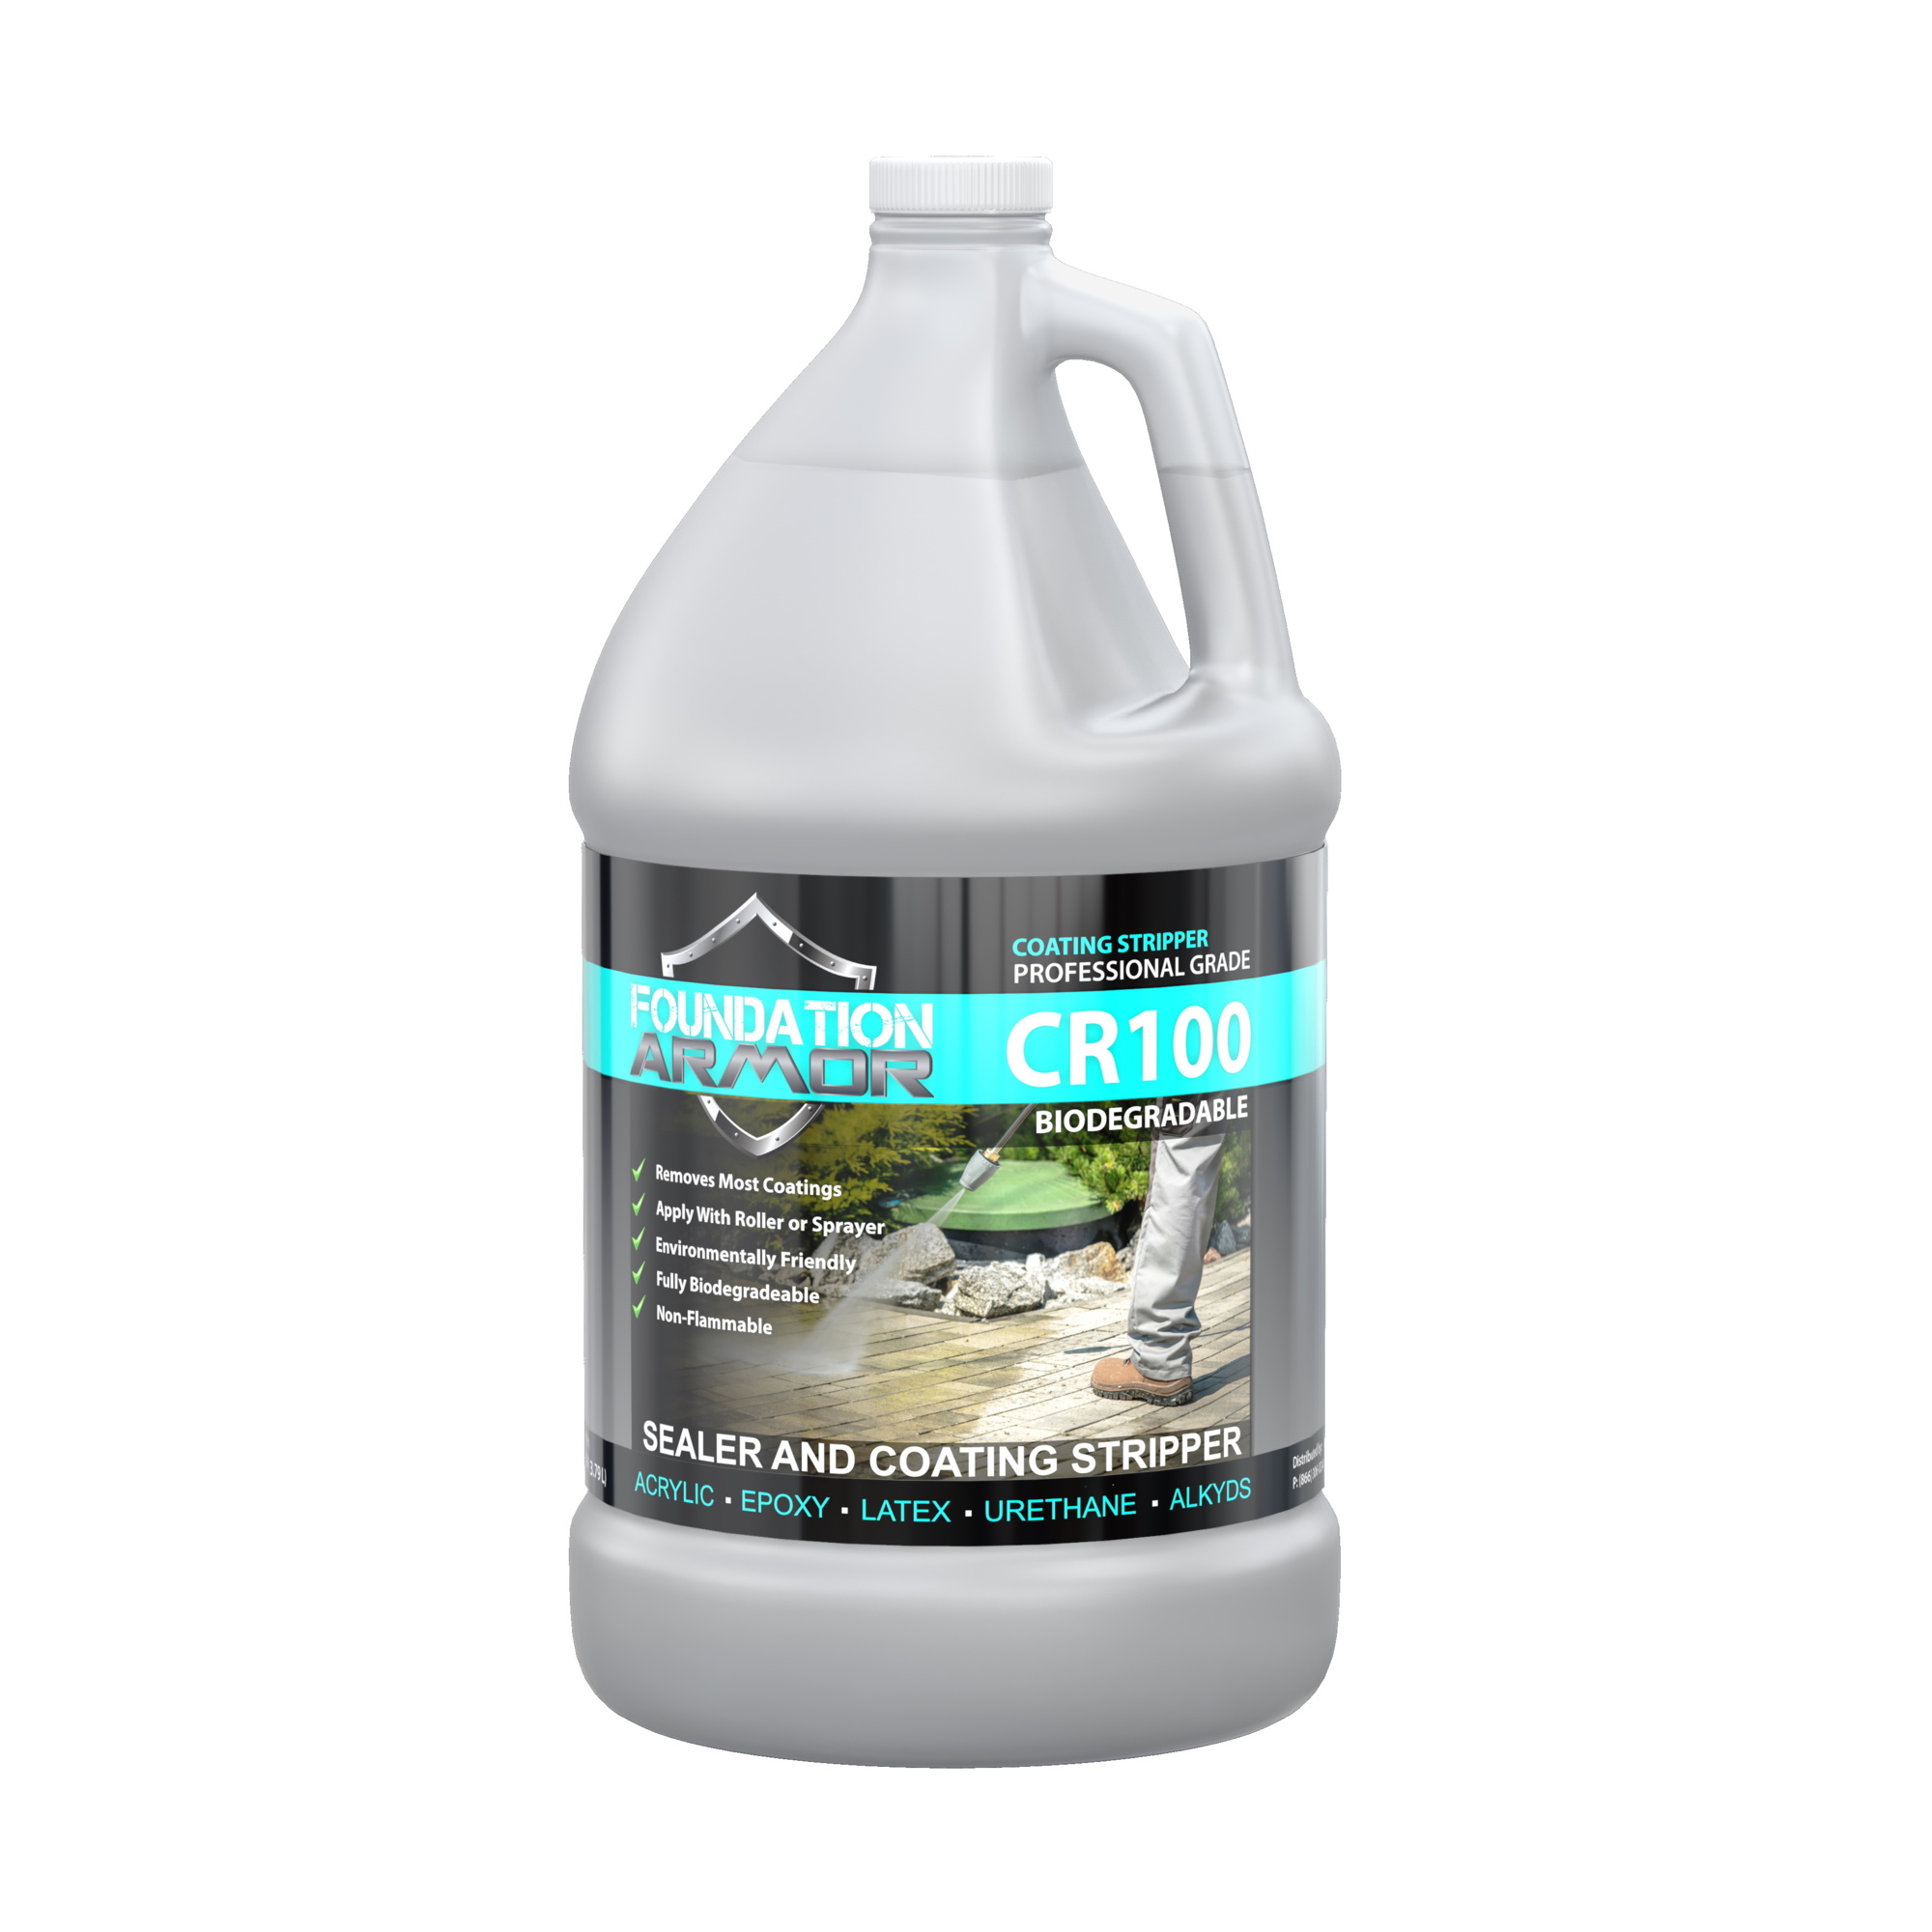 Foundation Armor, Concrete Sealer, Coating, and Paint Remover, Container Size 1 Gallon, Color Clear, Application Method Roller, Model CR1001GAL